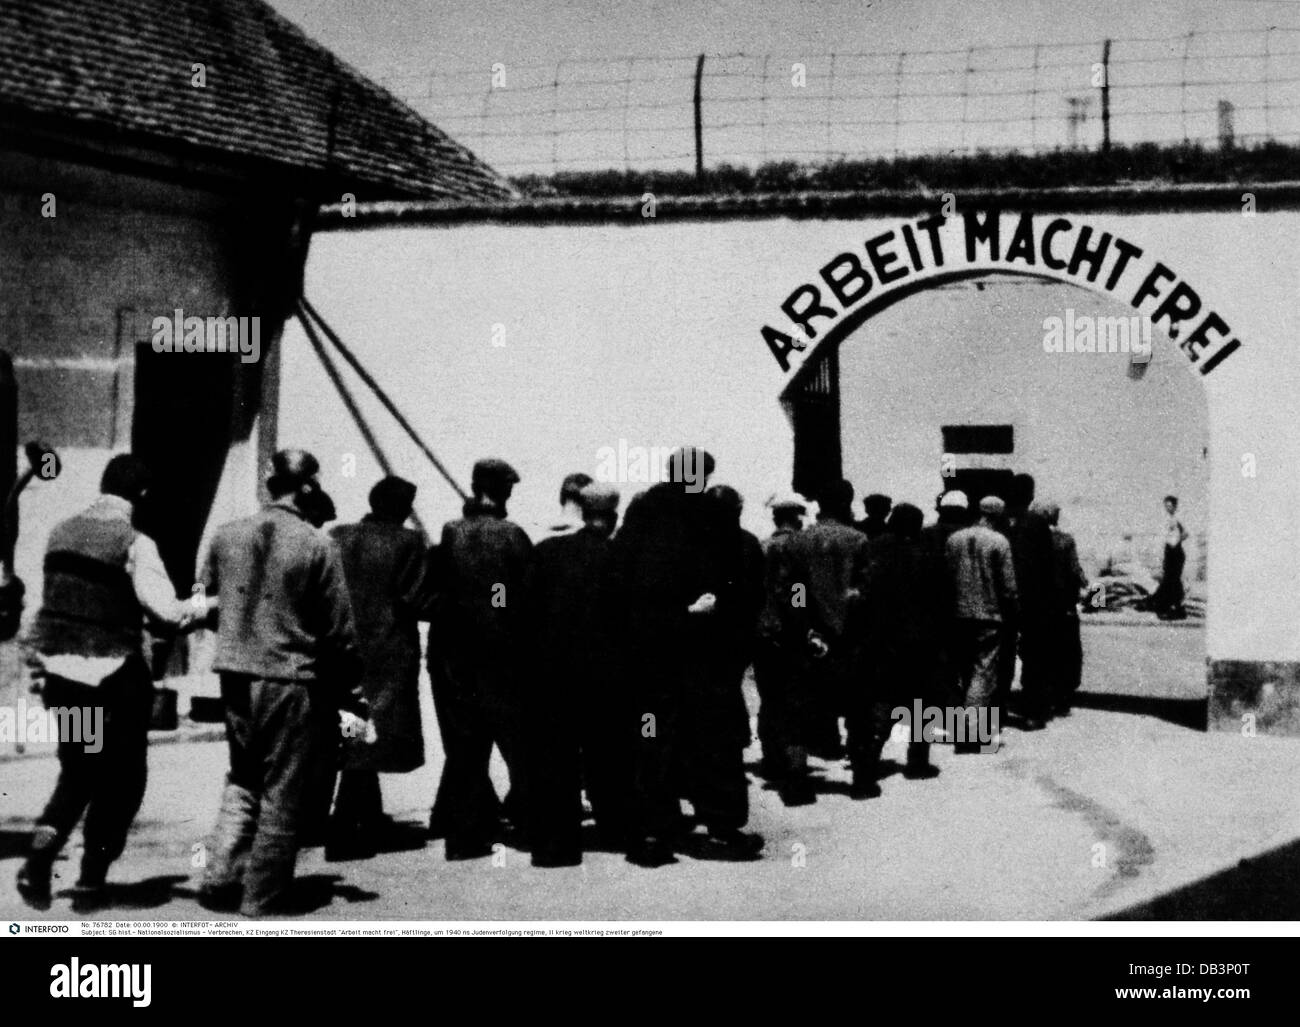 National Socialism / Nazism, crimes, Theresienstadt concentration camp, inmates at the entrance, 'Arbeit macht frei' (work makes free), circa 1942, Additional-Rights-Clearences-Not Available Stock Photo